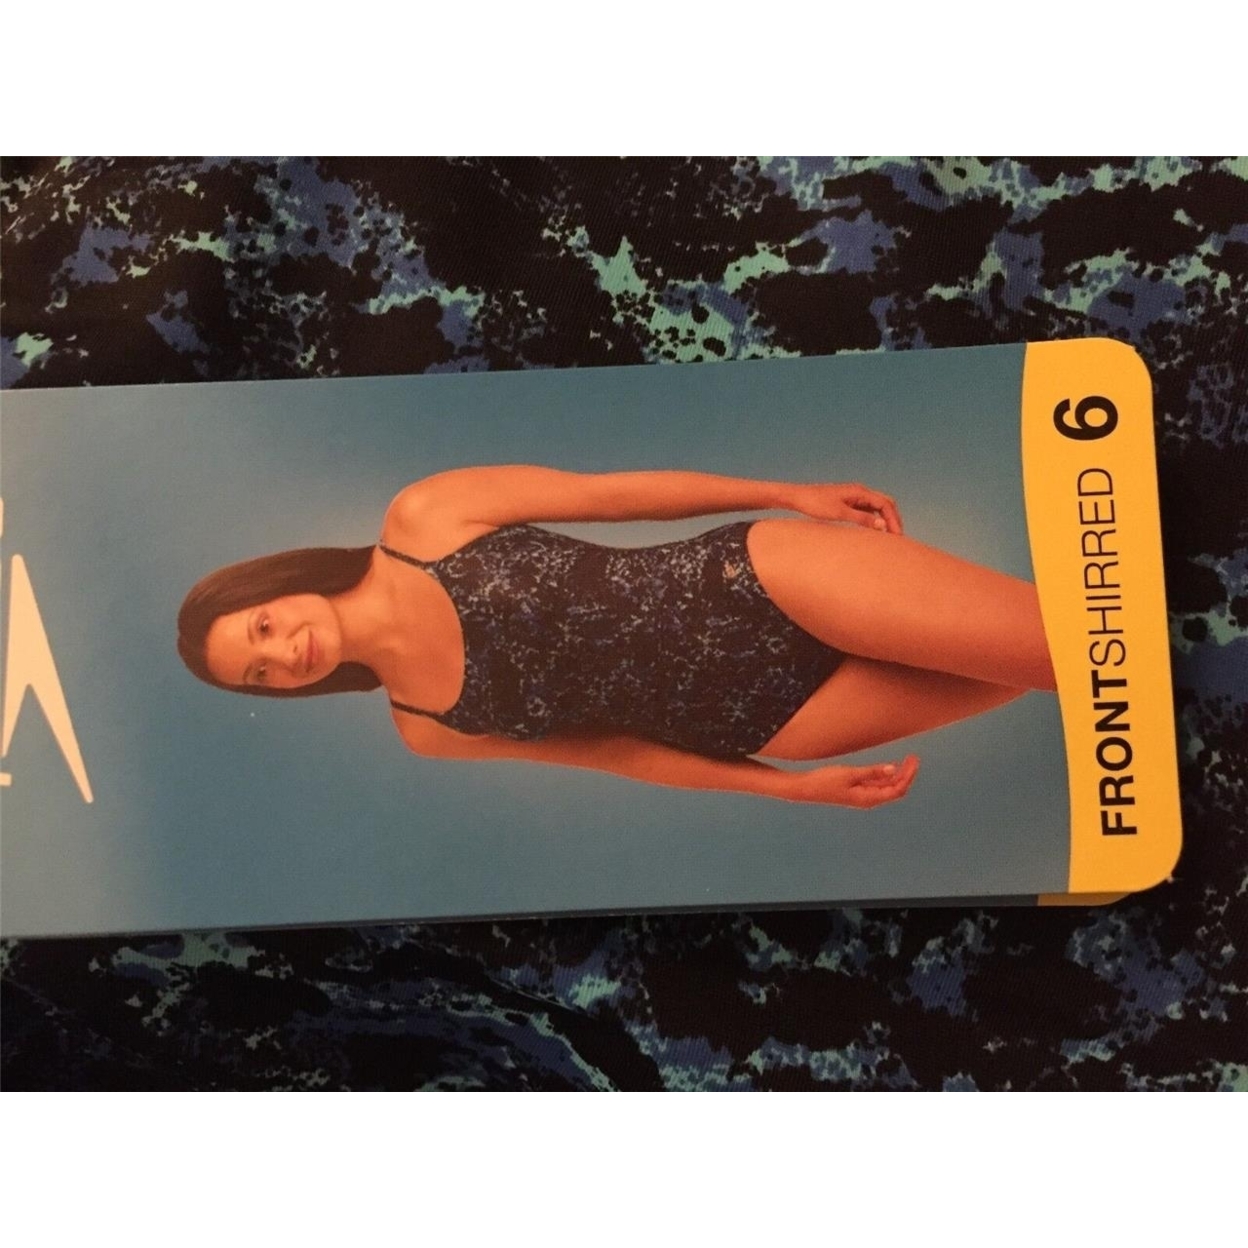 Speedo Women's One-Piece Swimsuit, BLUE TEXTURE, 6 New with box/tags - image 2 of 4